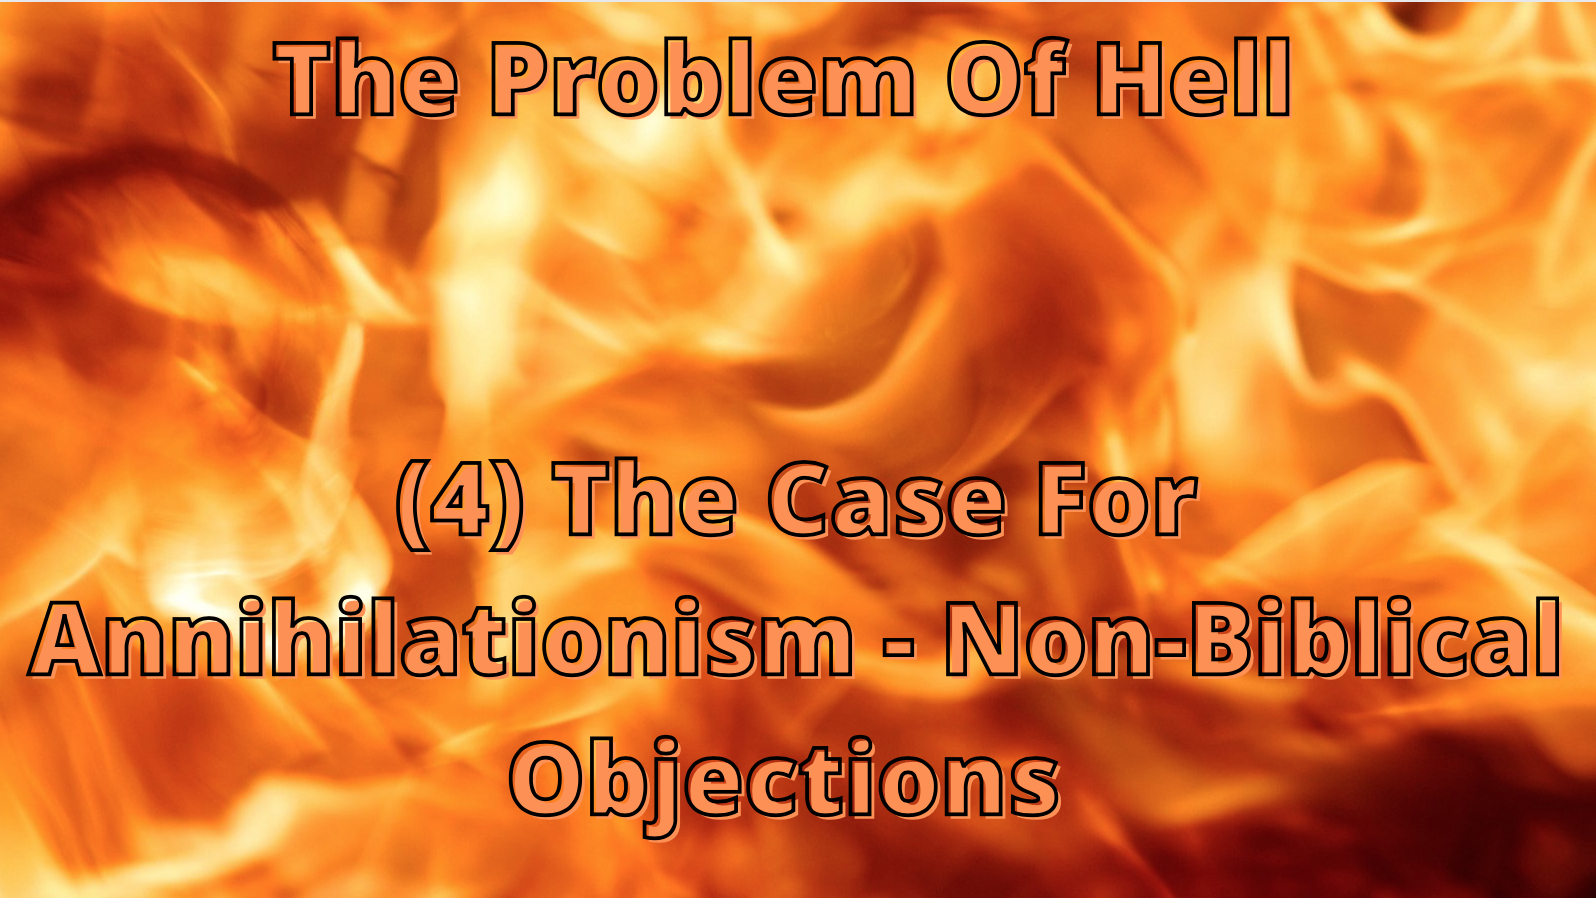 The Problem Of Hell (4) - The Case For Annihilationism: Non-Biblical Objections